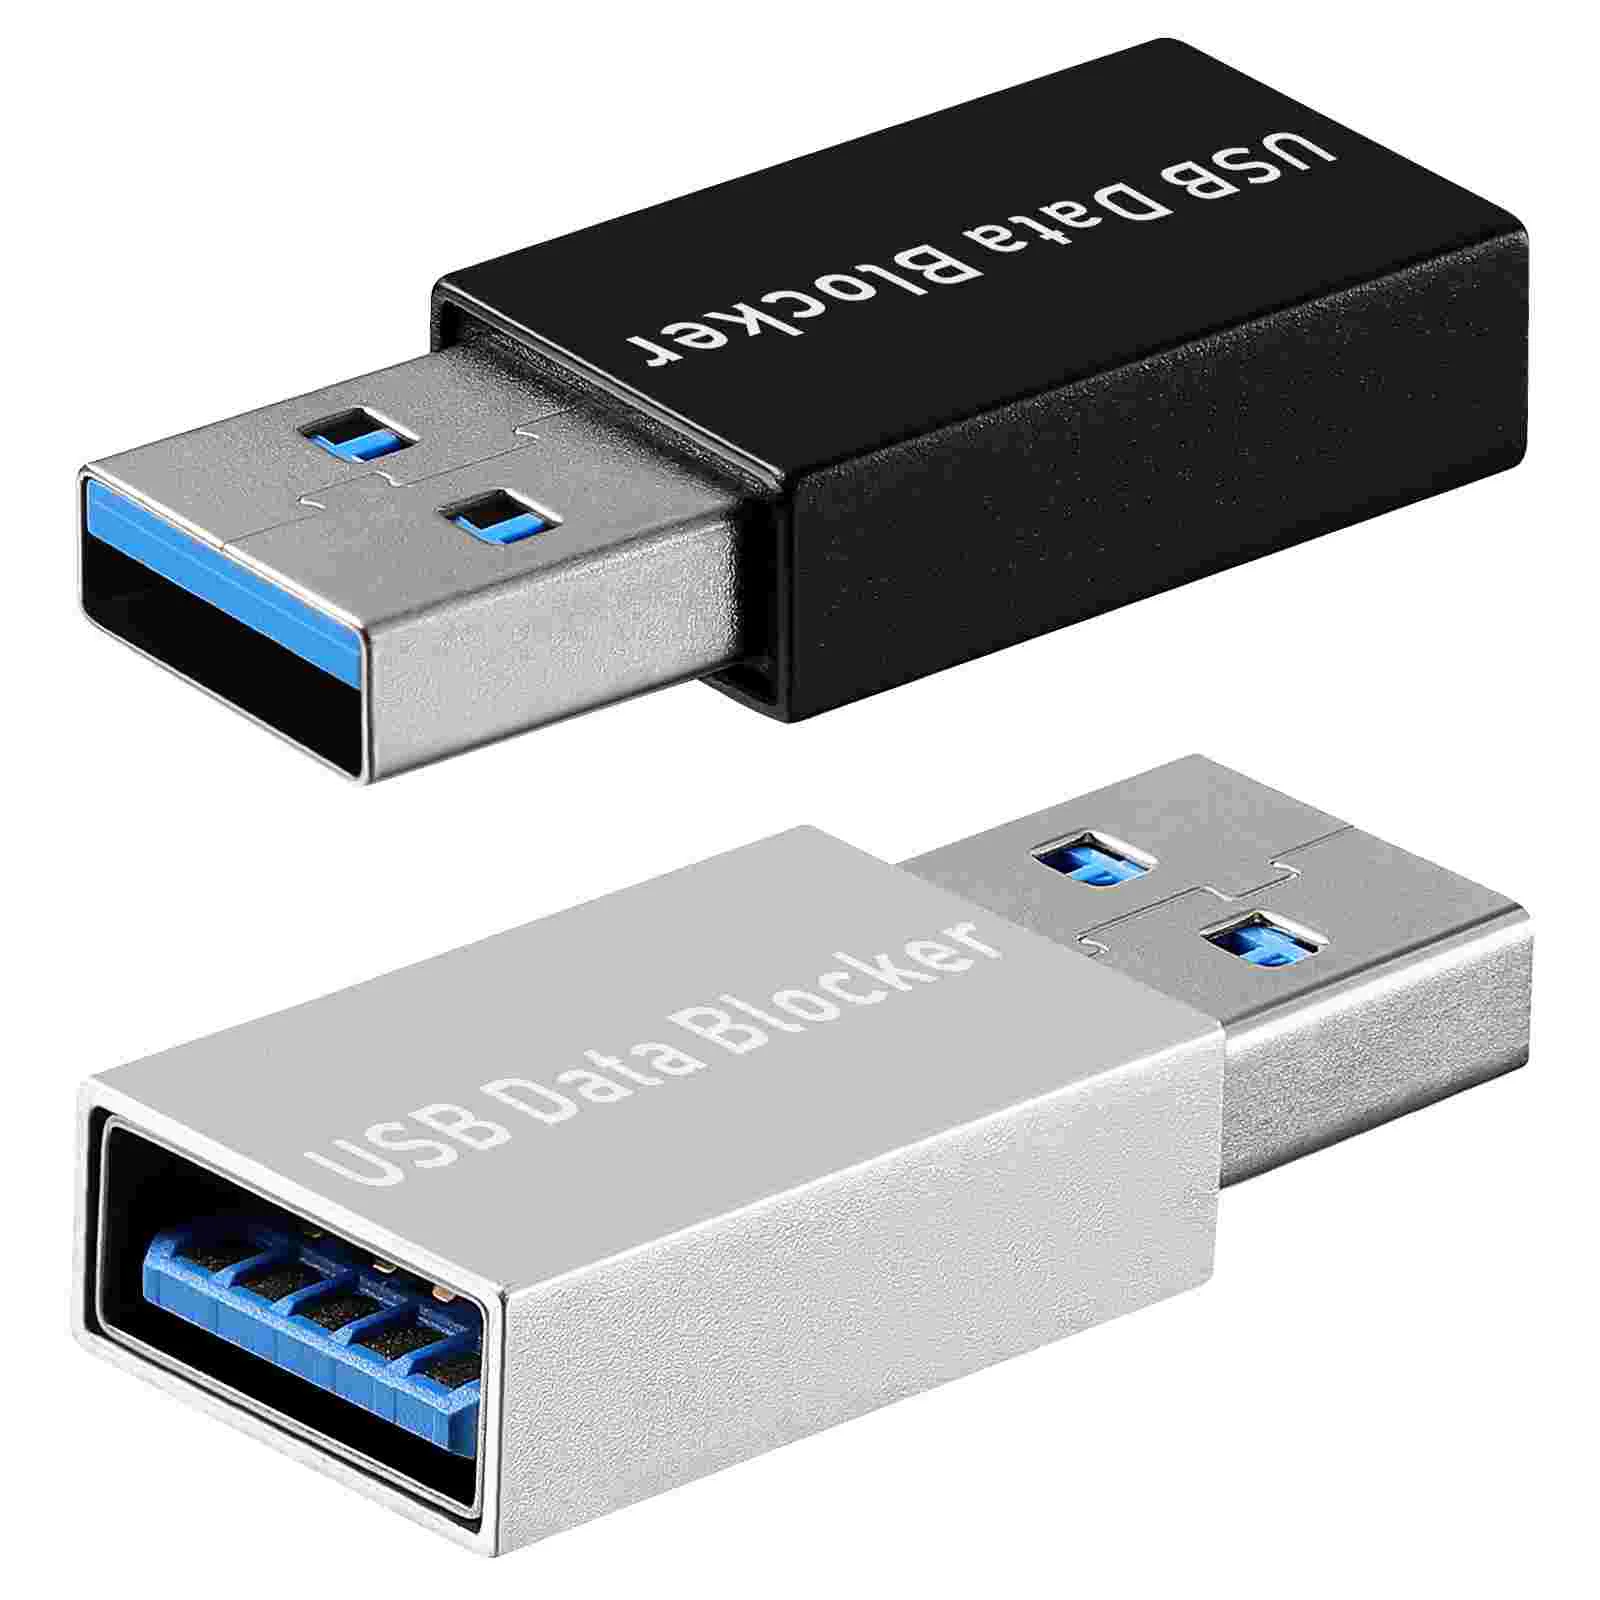 

2pcs Anti Hacking Convenient Charge-Only USB Defenders Data Sync Blockers for Travel Trip Charging